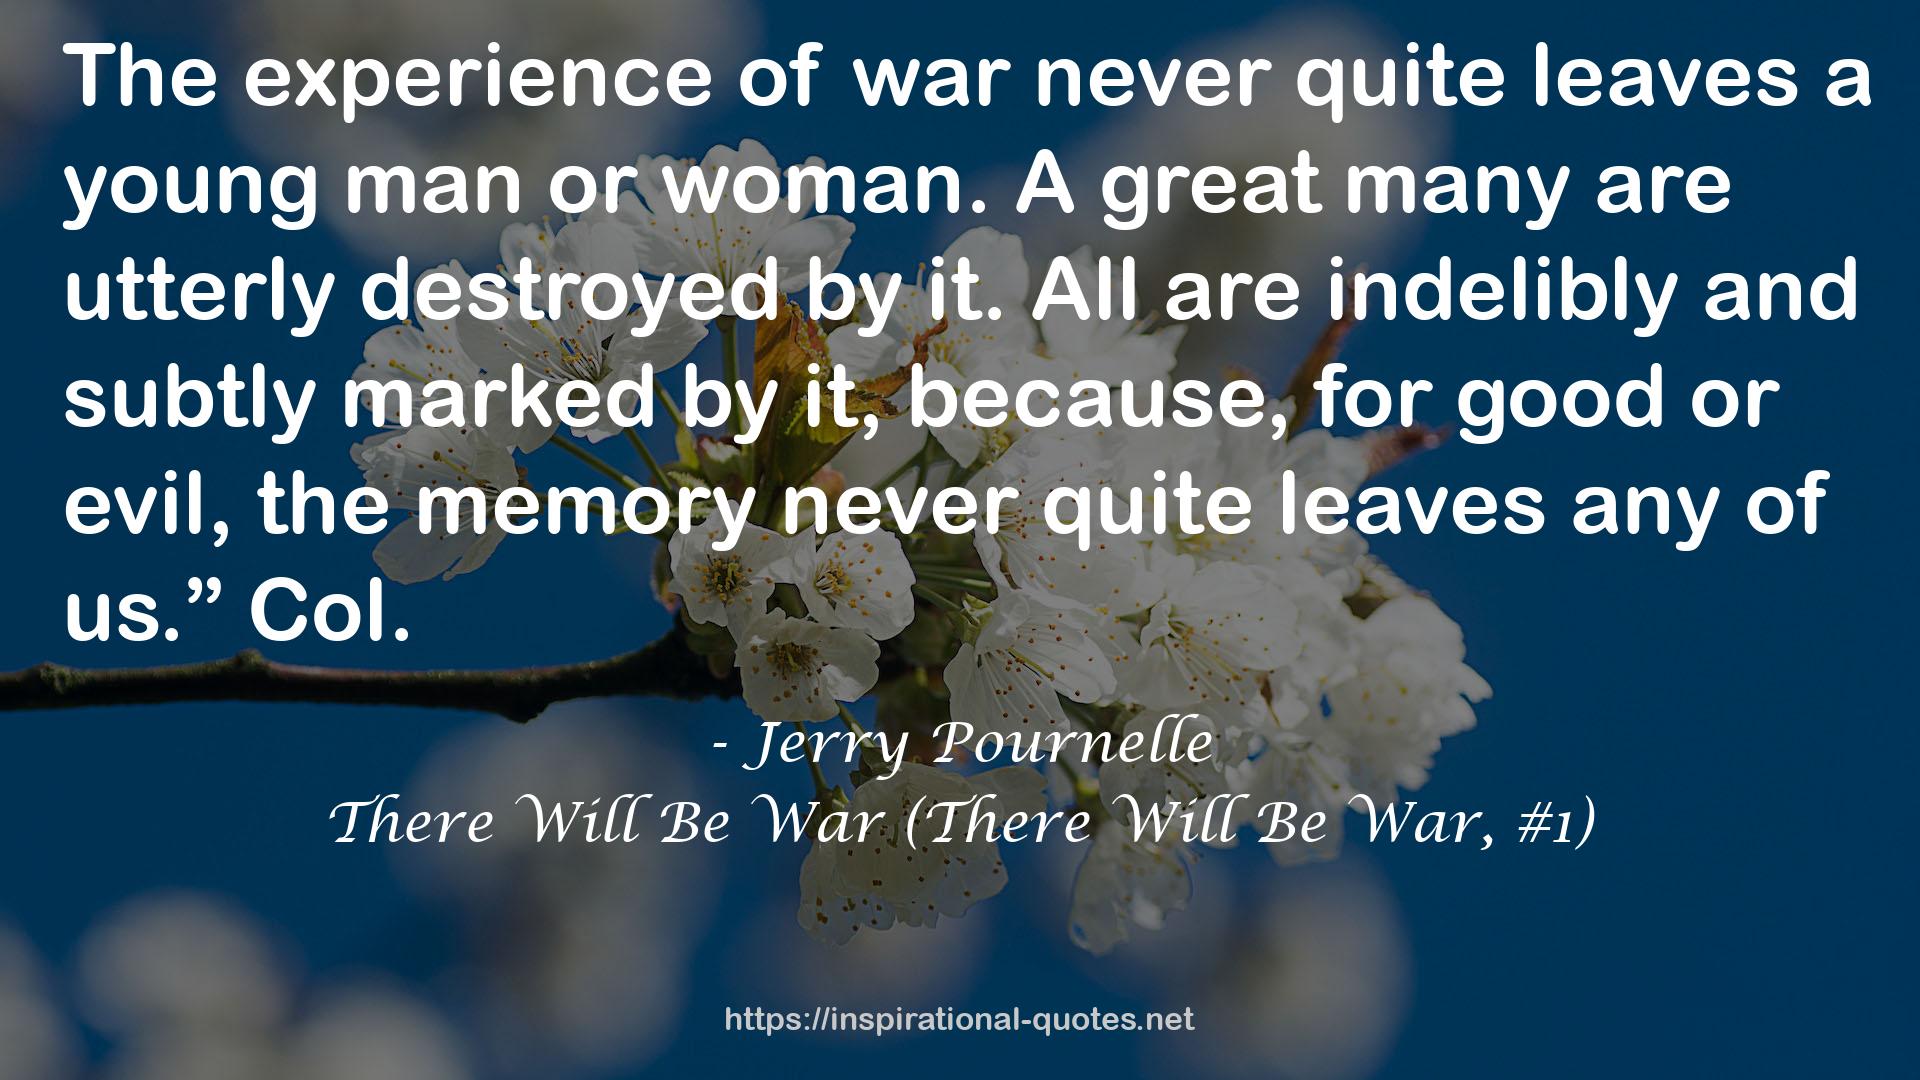 There Will Be War (There Will Be War, #1) QUOTES